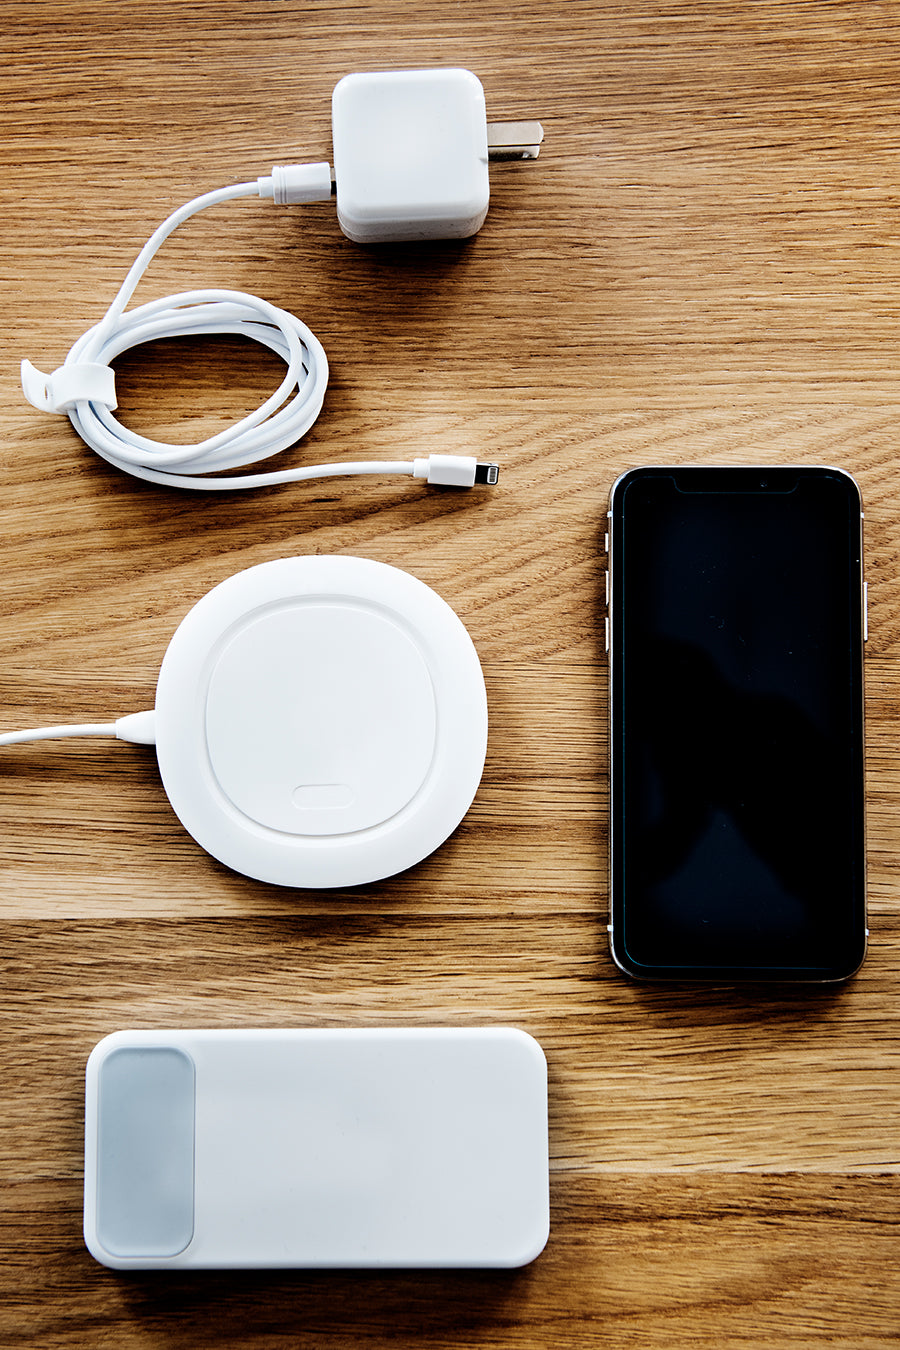 Why Wireless Charging And What Features Do You Need to Consider? - EZVALO